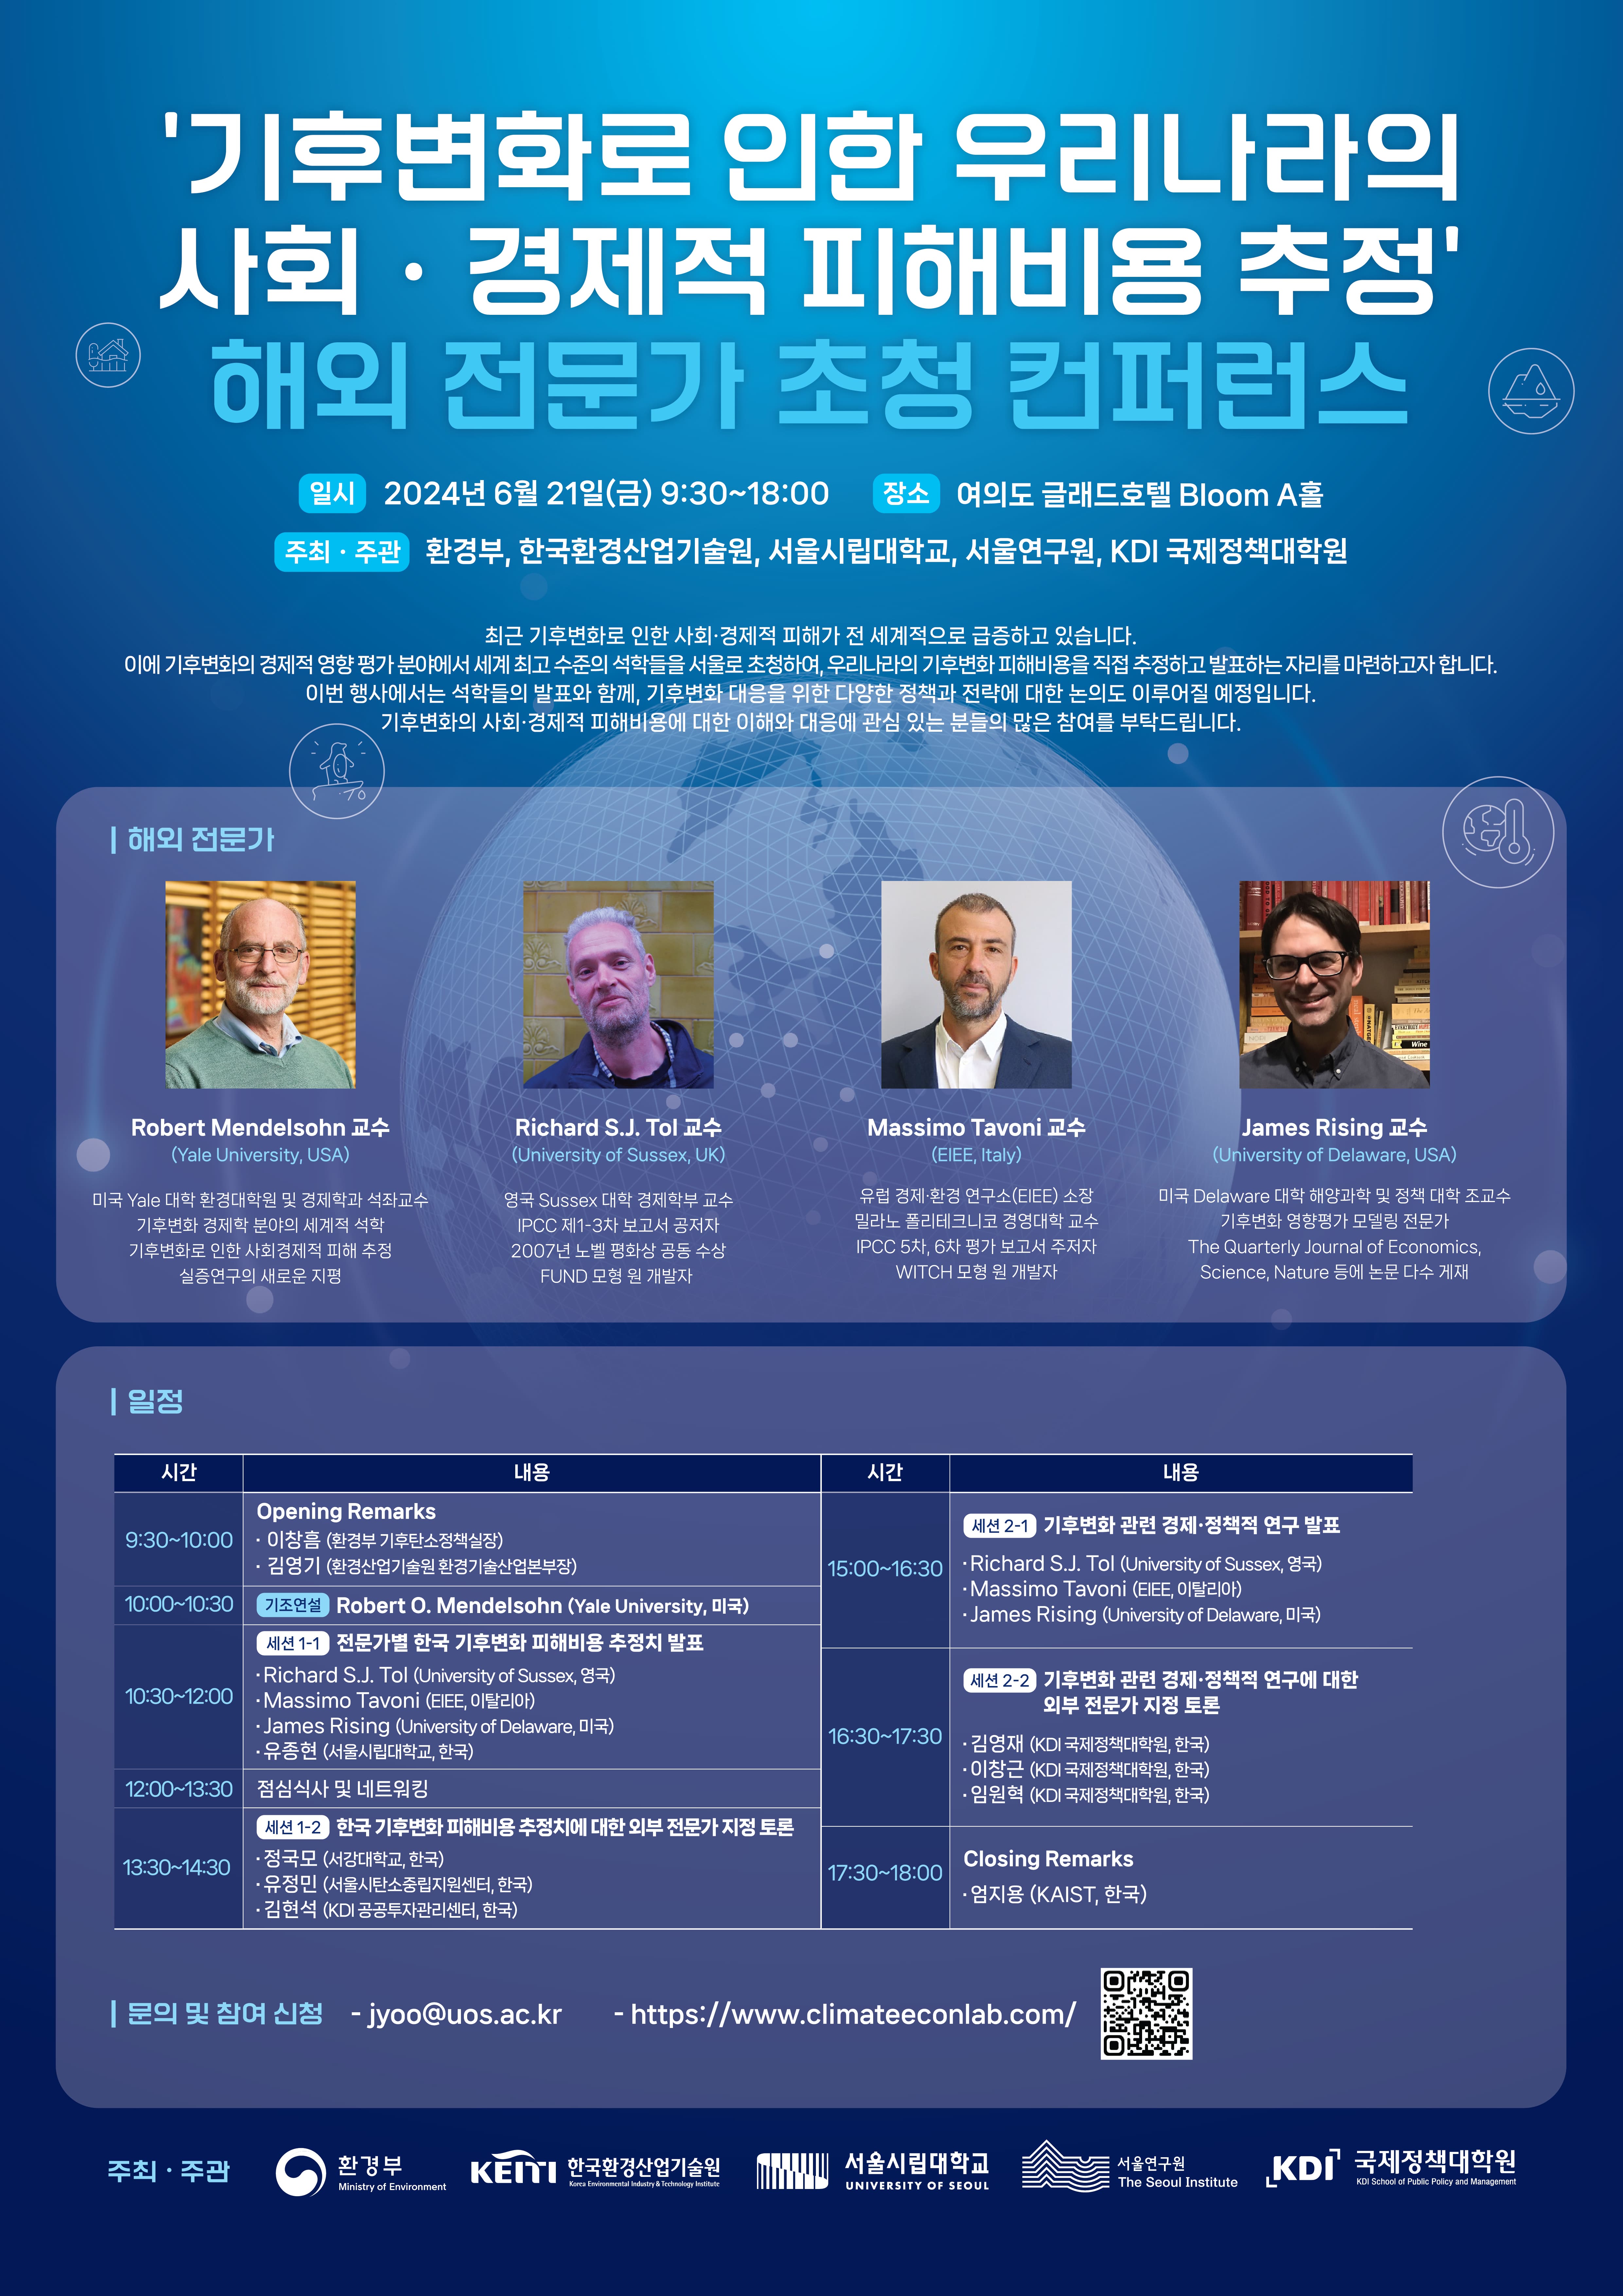 [RSVP] Sustainable Development Lab Conference: Estimation of the Social Cost of Carbon in South Korea (June 21st, 9:30)